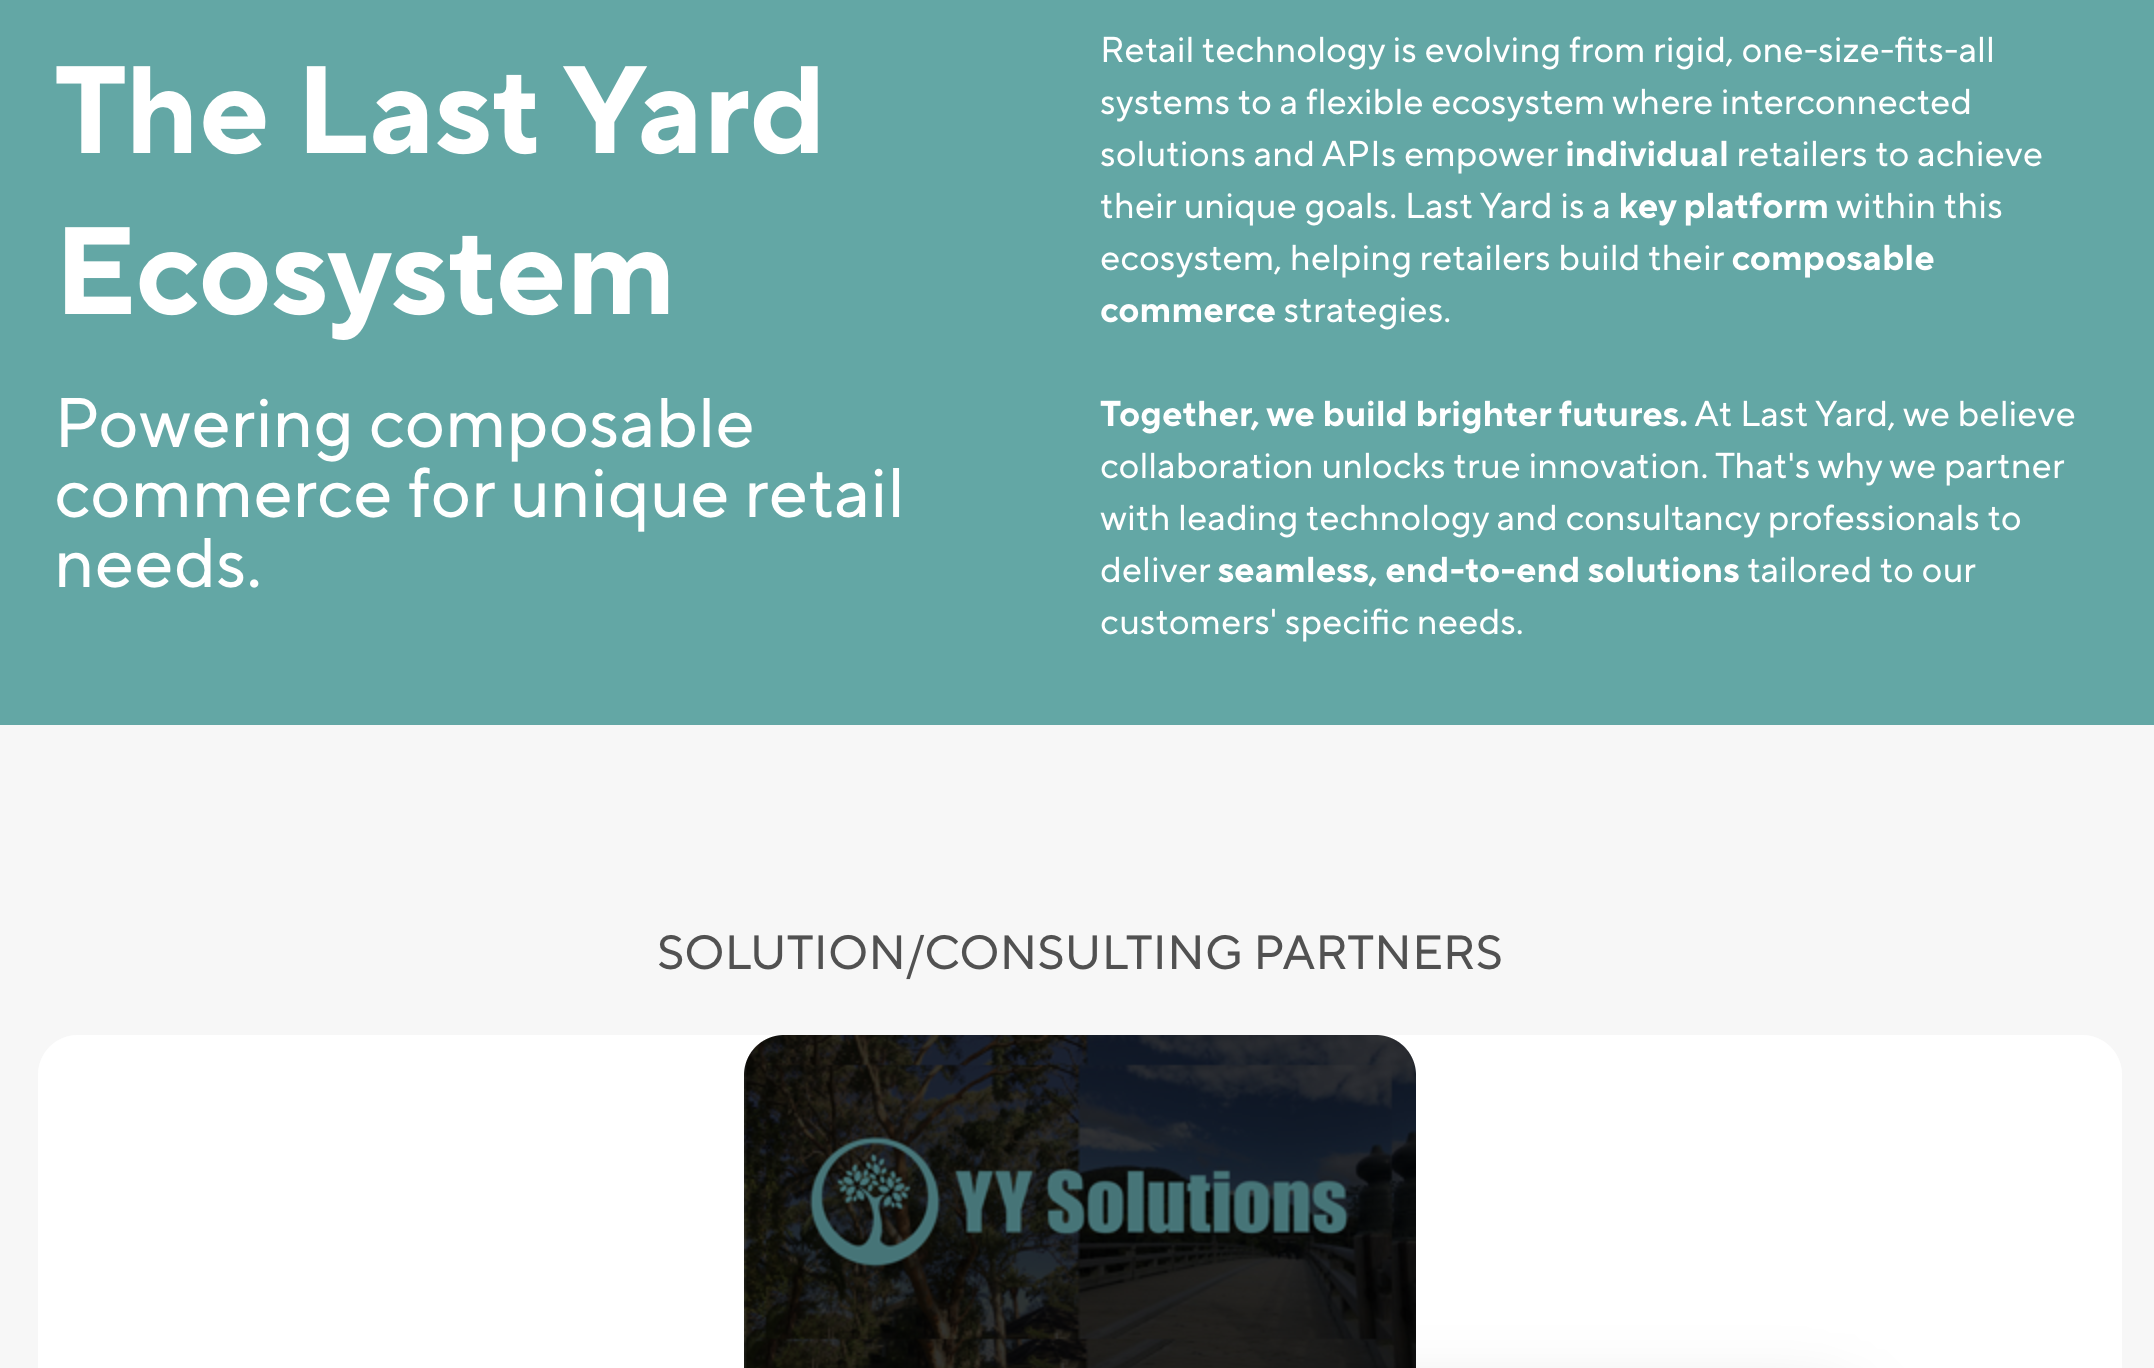 YY Solutions is in Last Yard's Ecosystem!